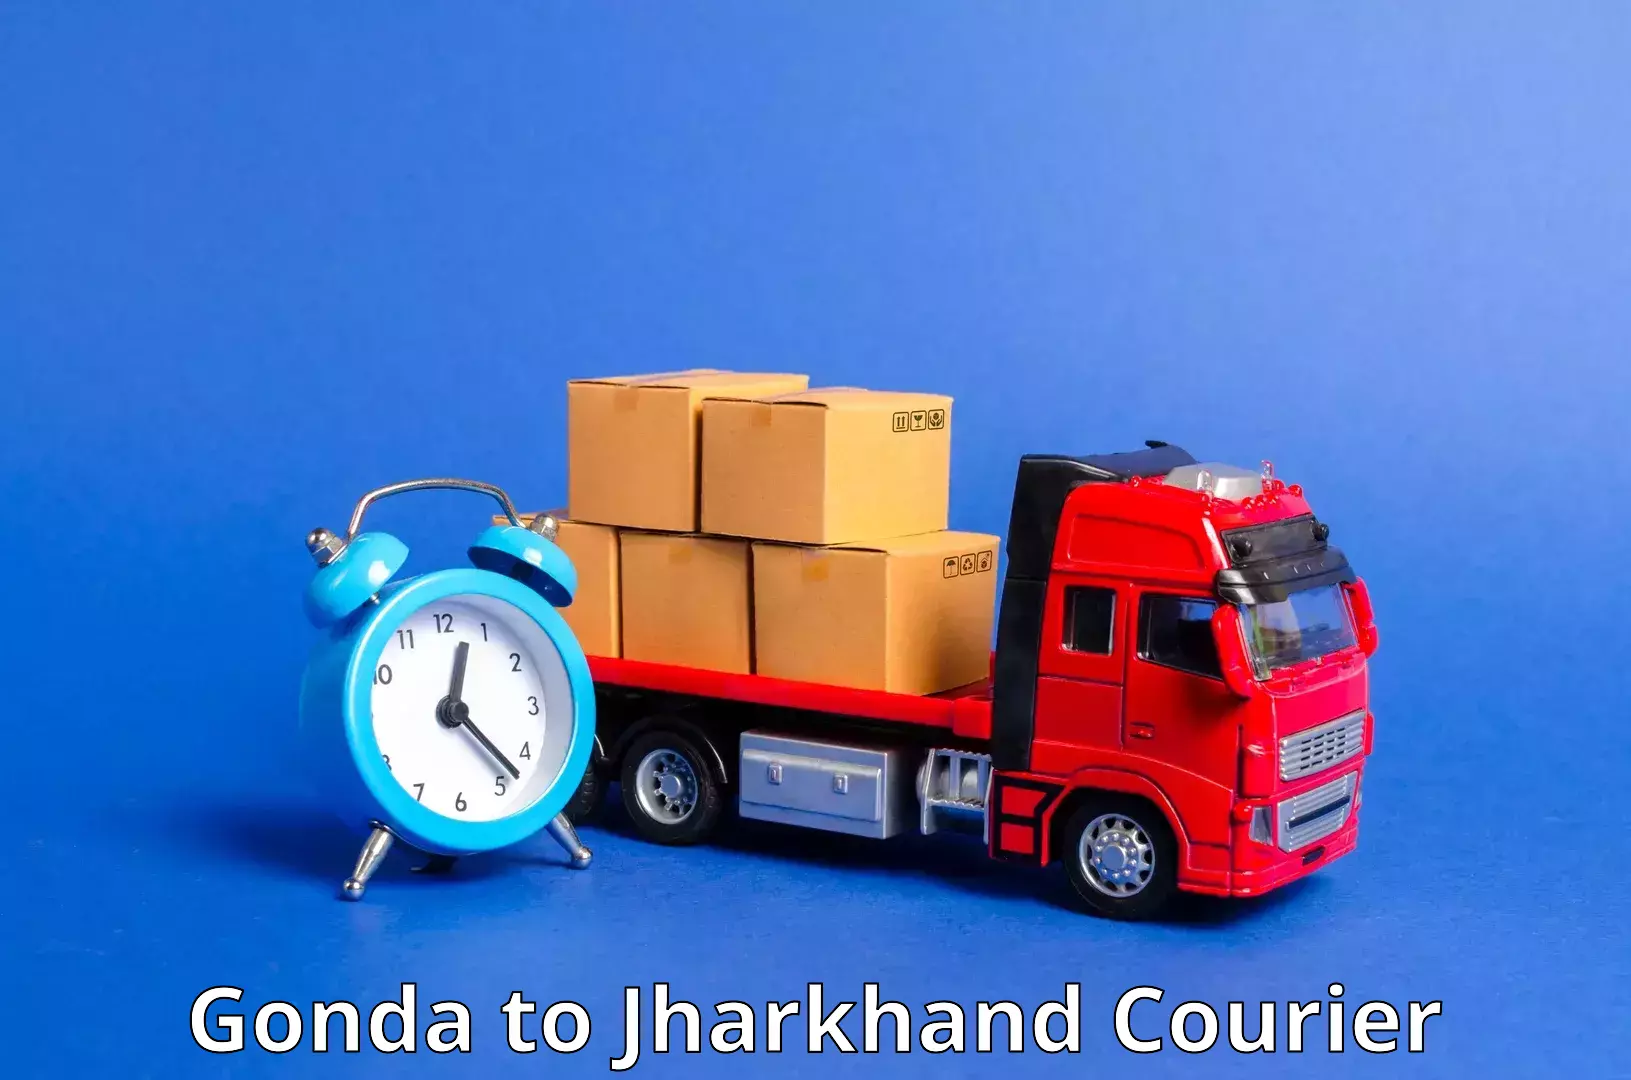 Flexible delivery scheduling Gonda to Jharkhand